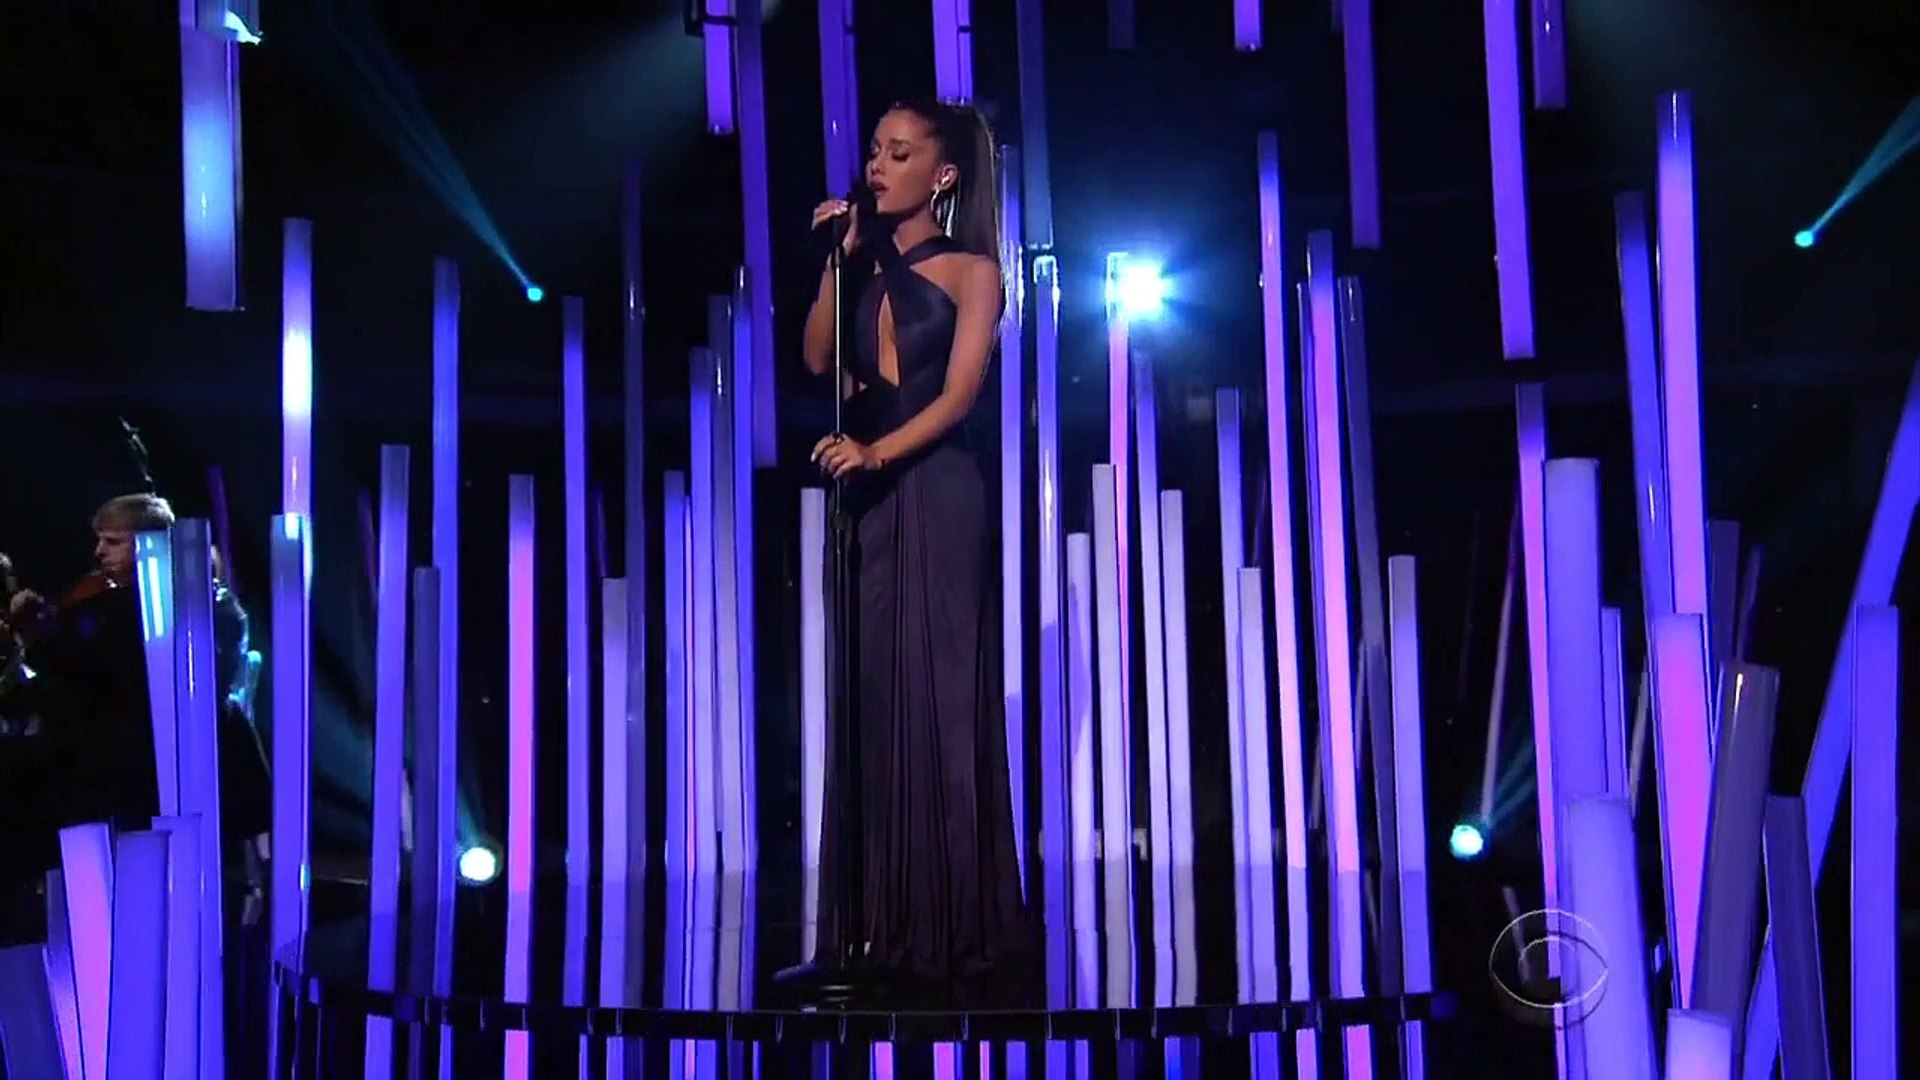 Ariana Grande Porn Google - Ariana Grande - Just a Little Bit of Your Heart - Grammys 2015 HD 720p -  VÃ­deo Dailymotion